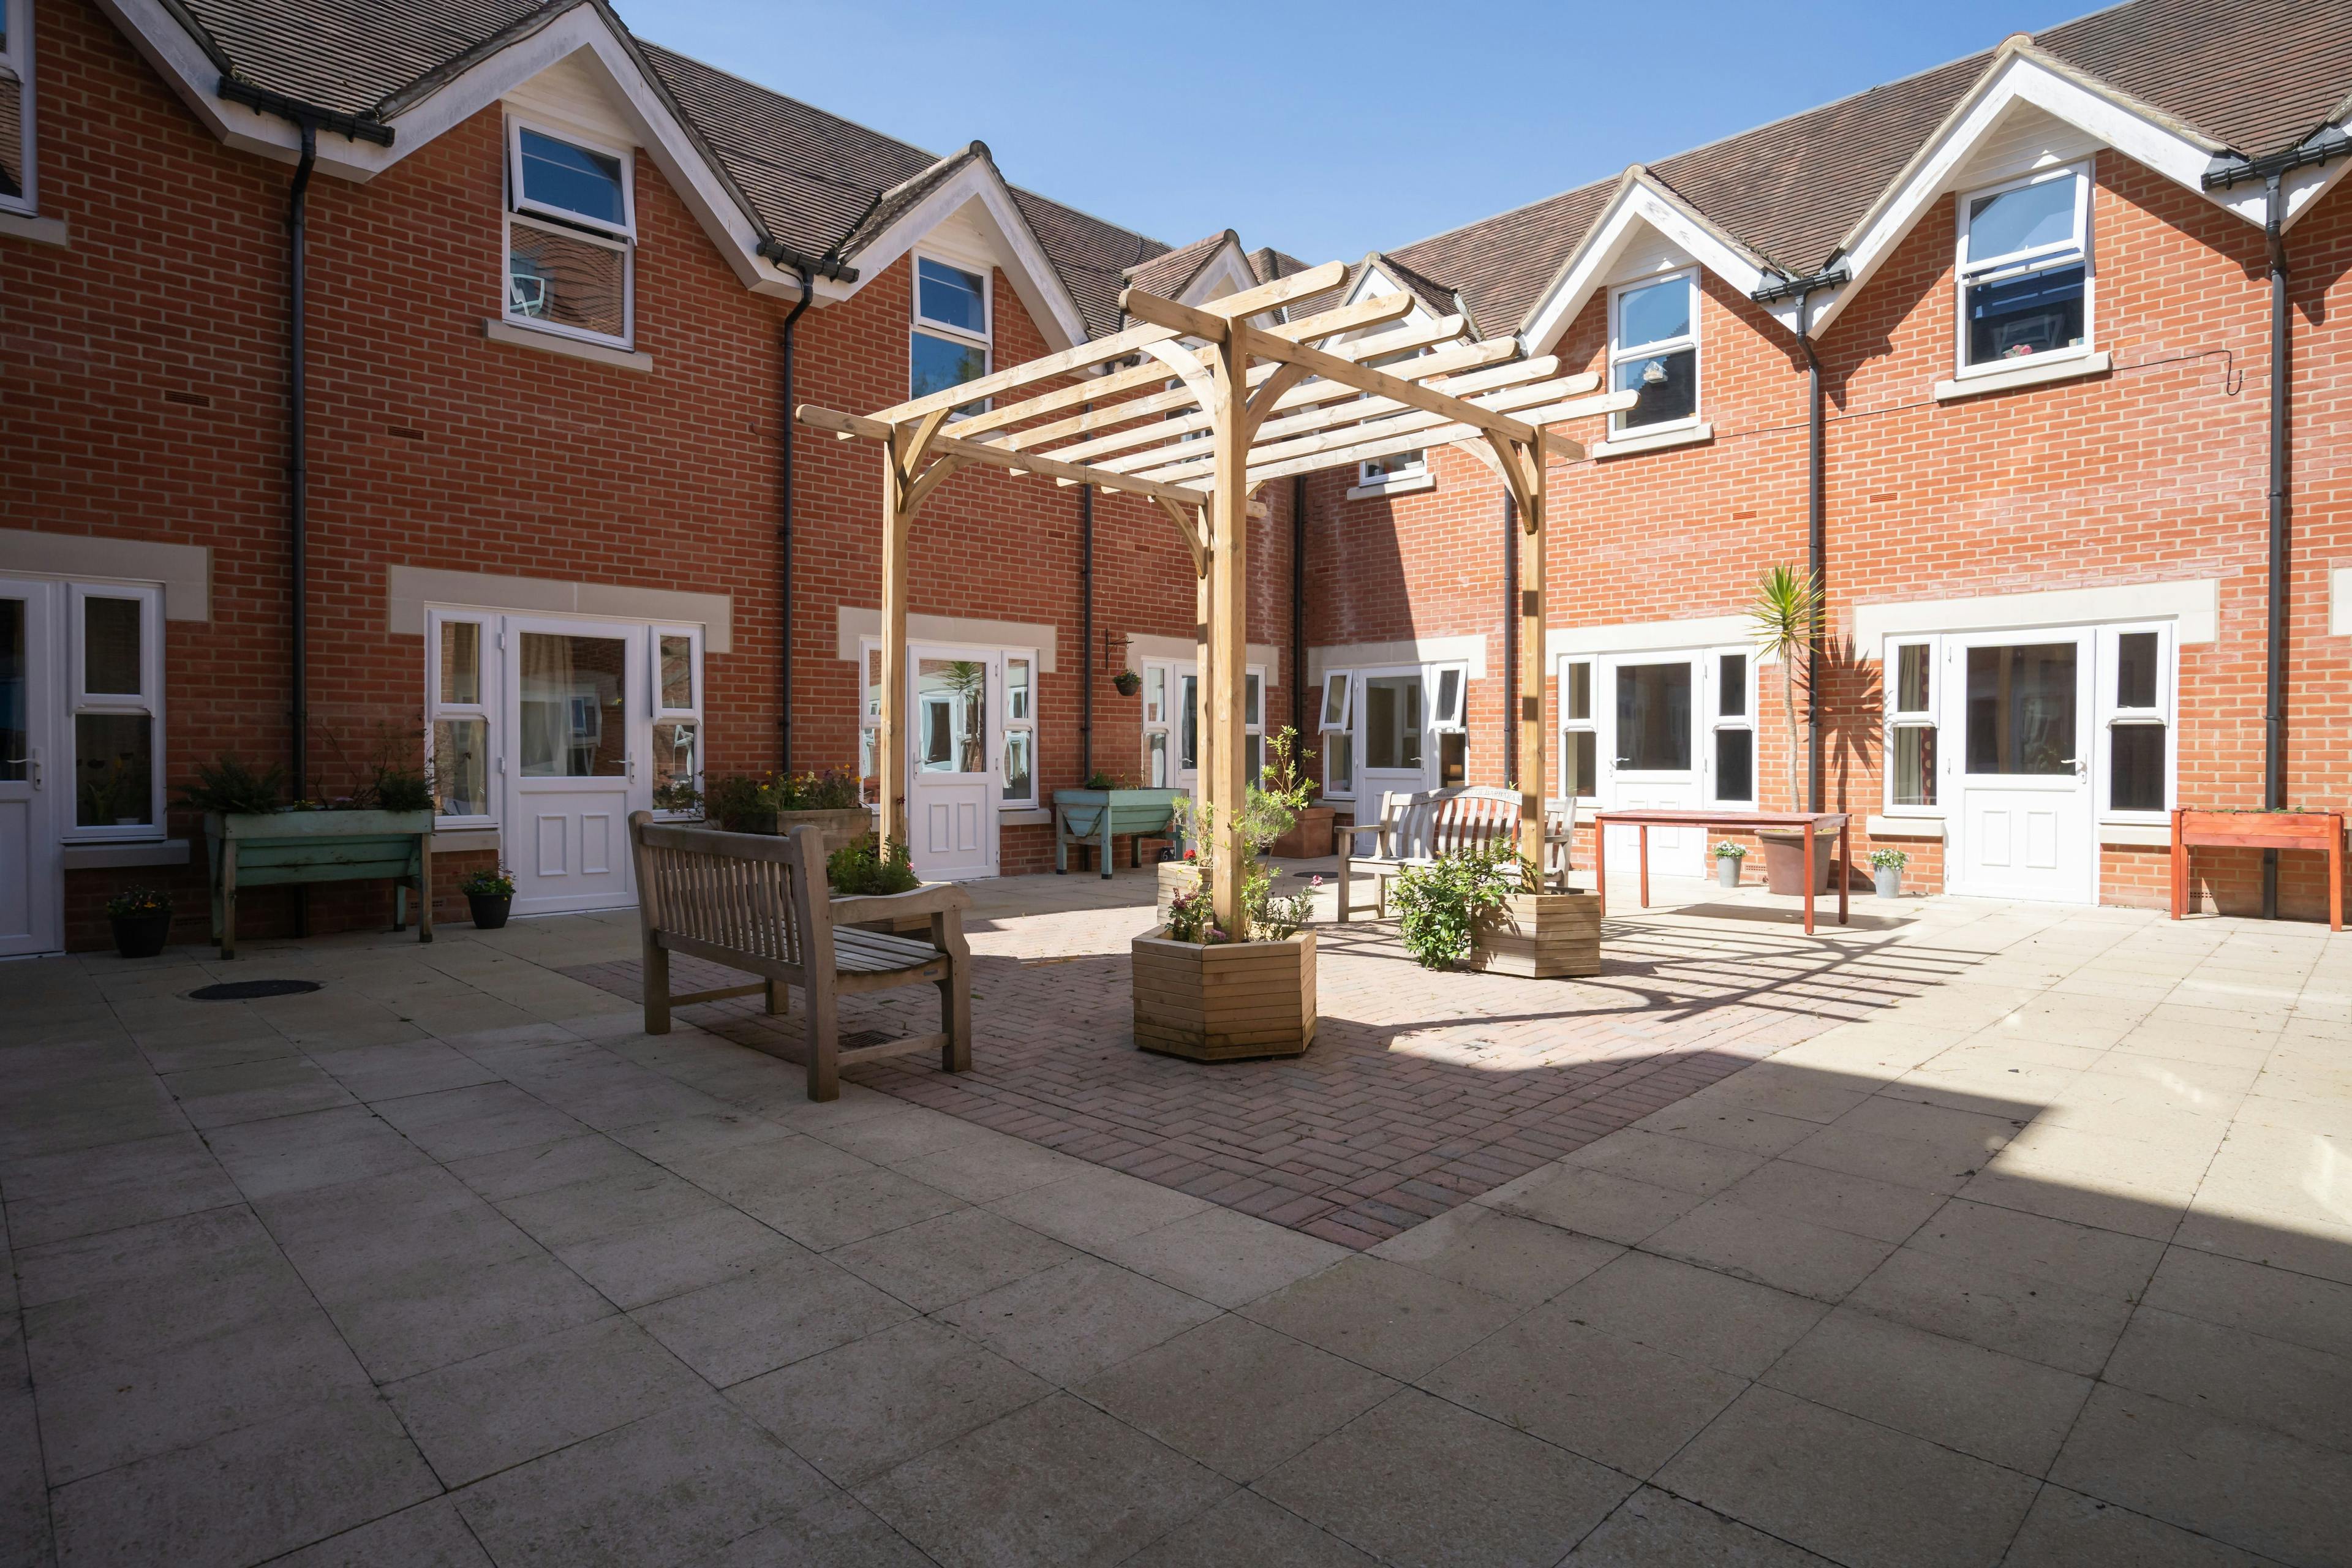 Terrace of Branksome Park care home in Poole, Dorset